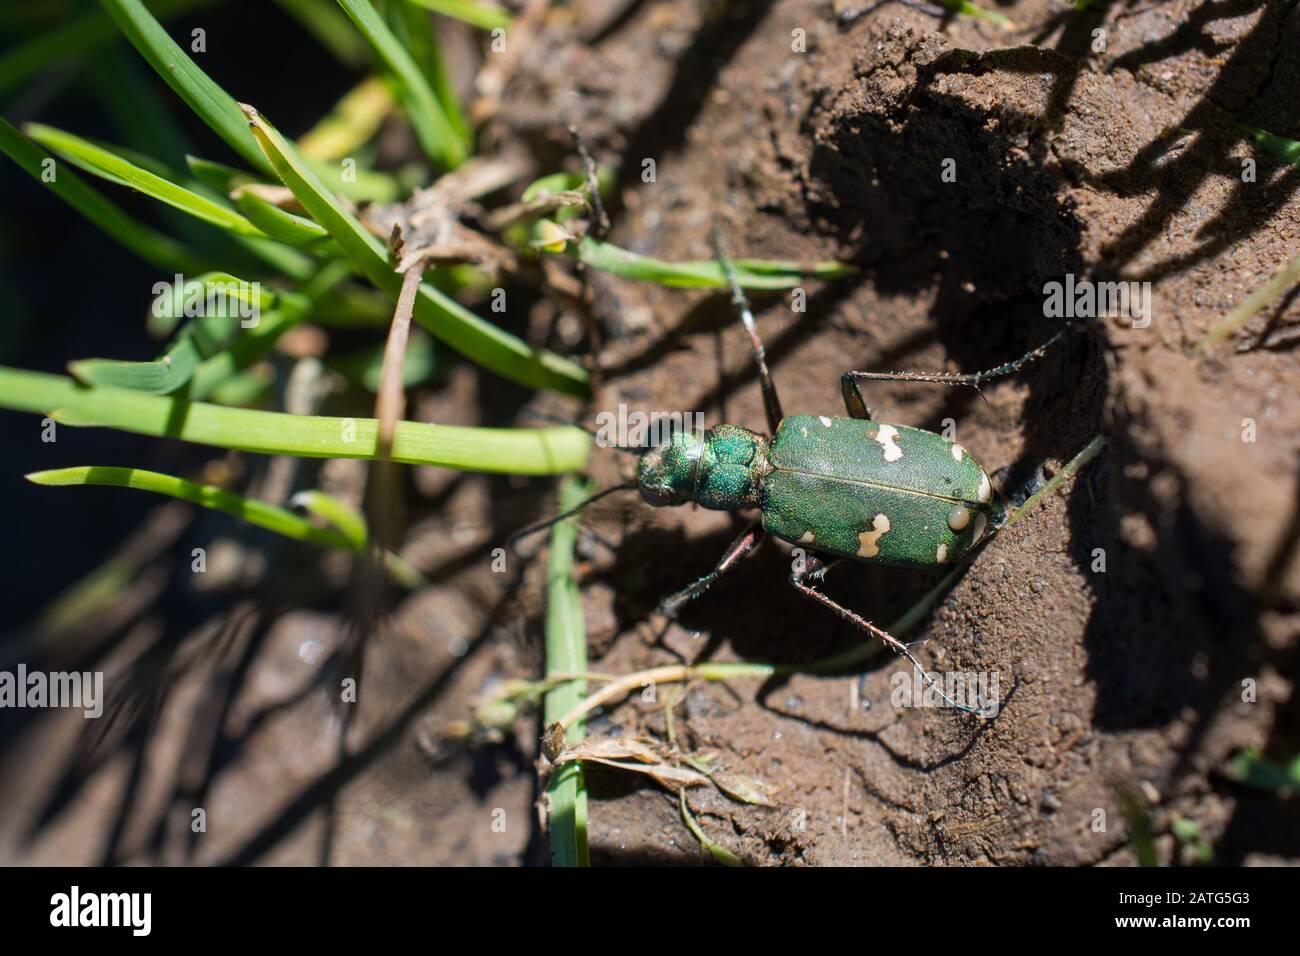 Little colorful bug in nature environment Stock Photo